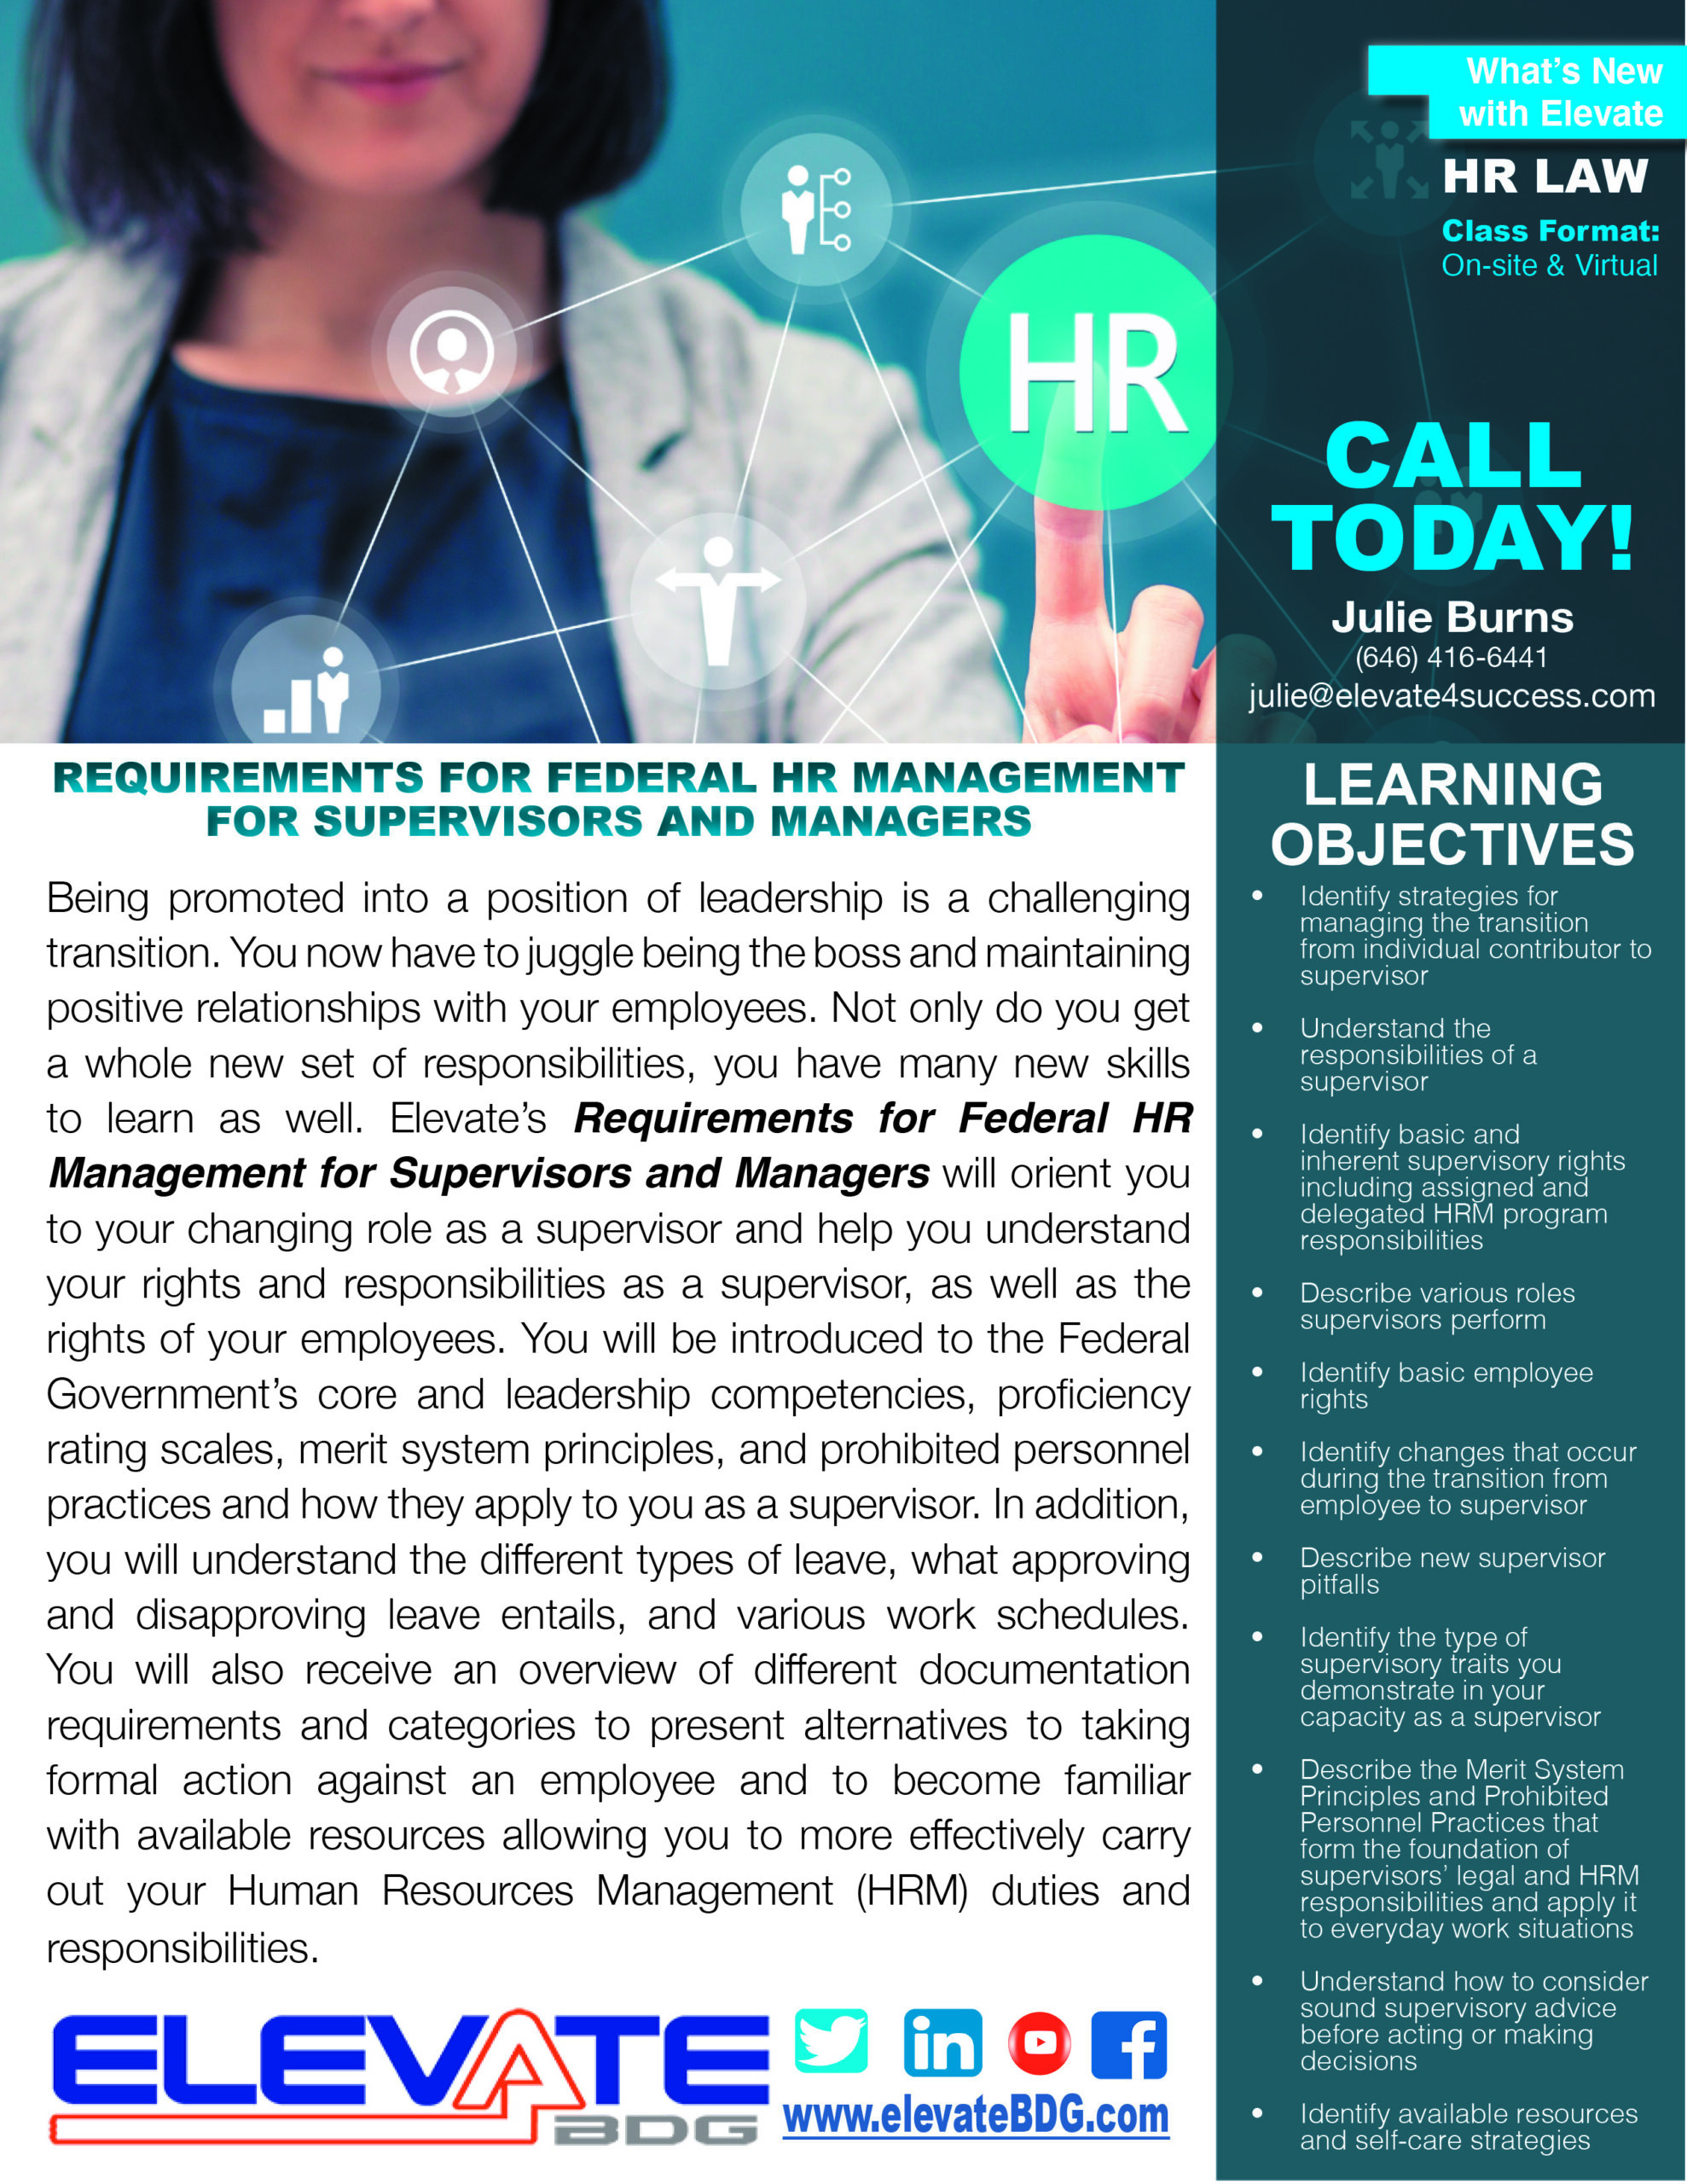 Requirements for Federal HR Management for Supervisors and Managers